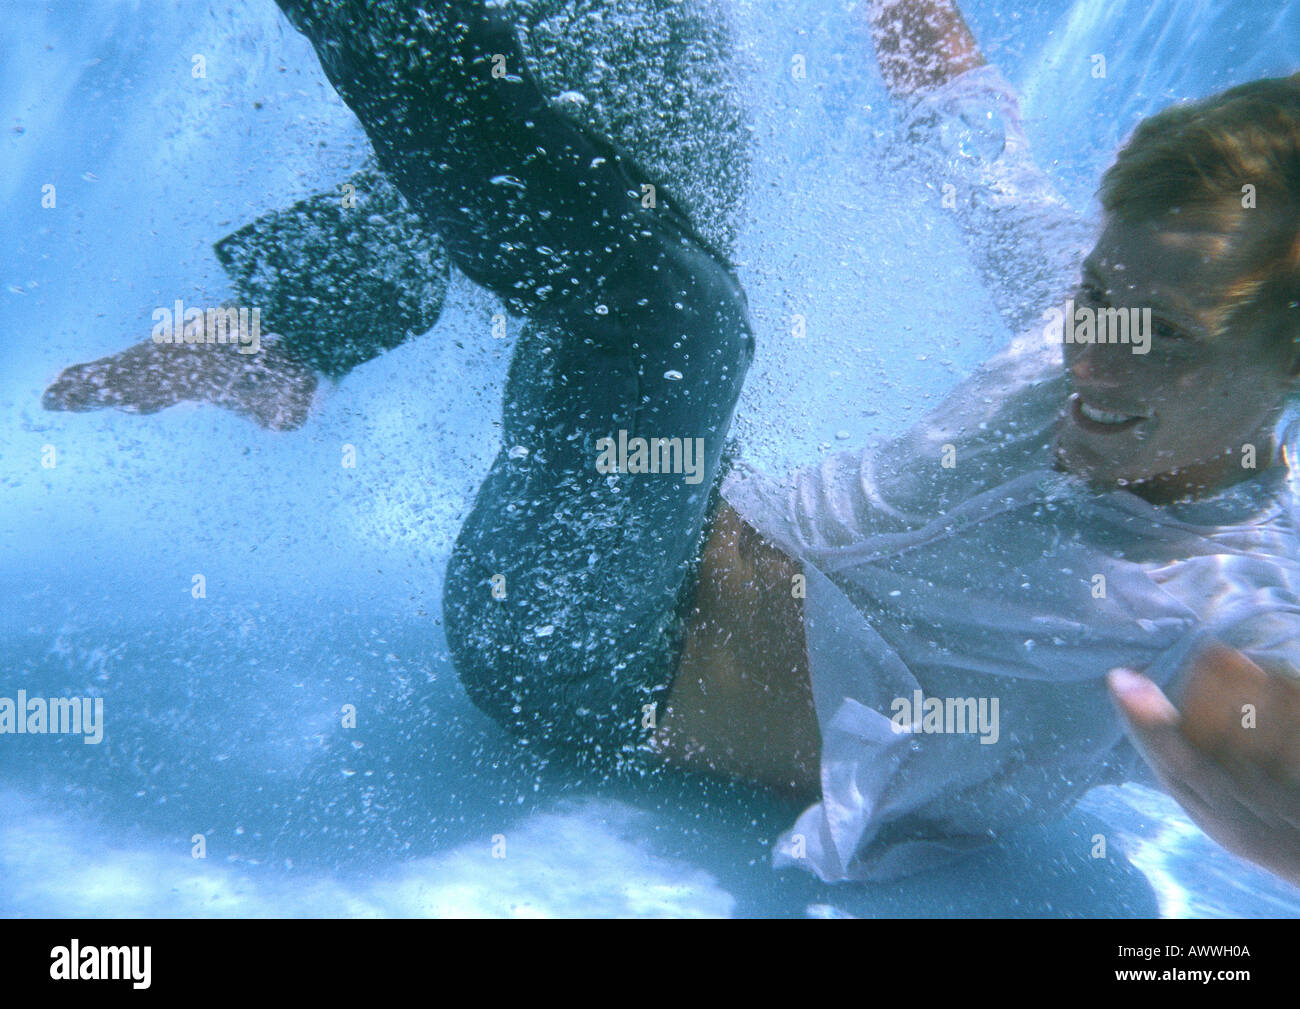 Fully clothed man at bottom of swimming pool, smiling Stock Photo - Alamy